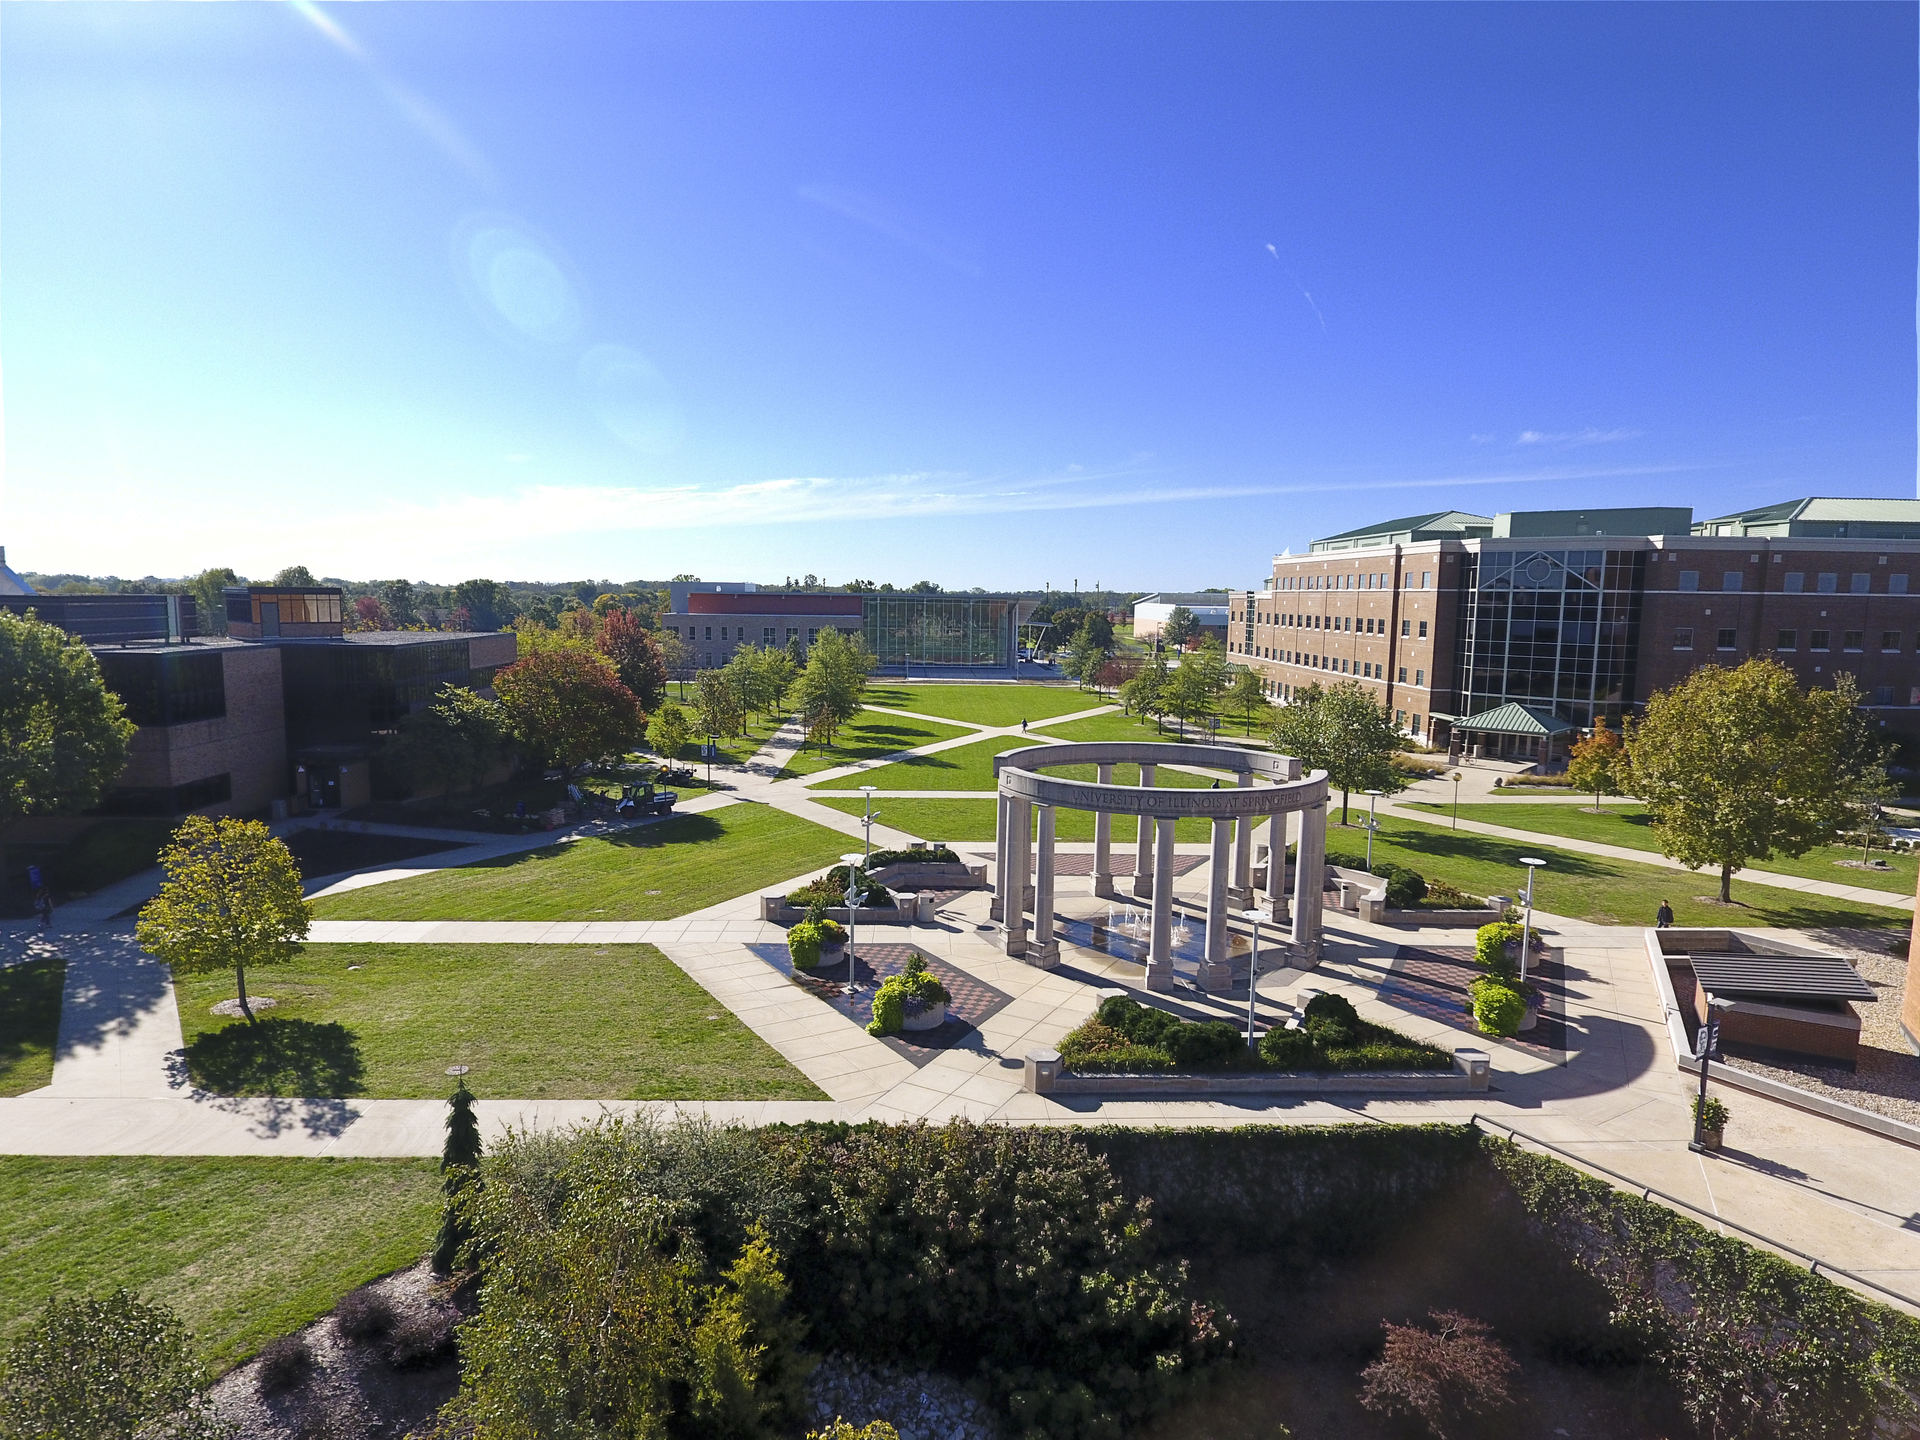 Drone photo of UIS campus with the colonnade, student union and UHB in view.